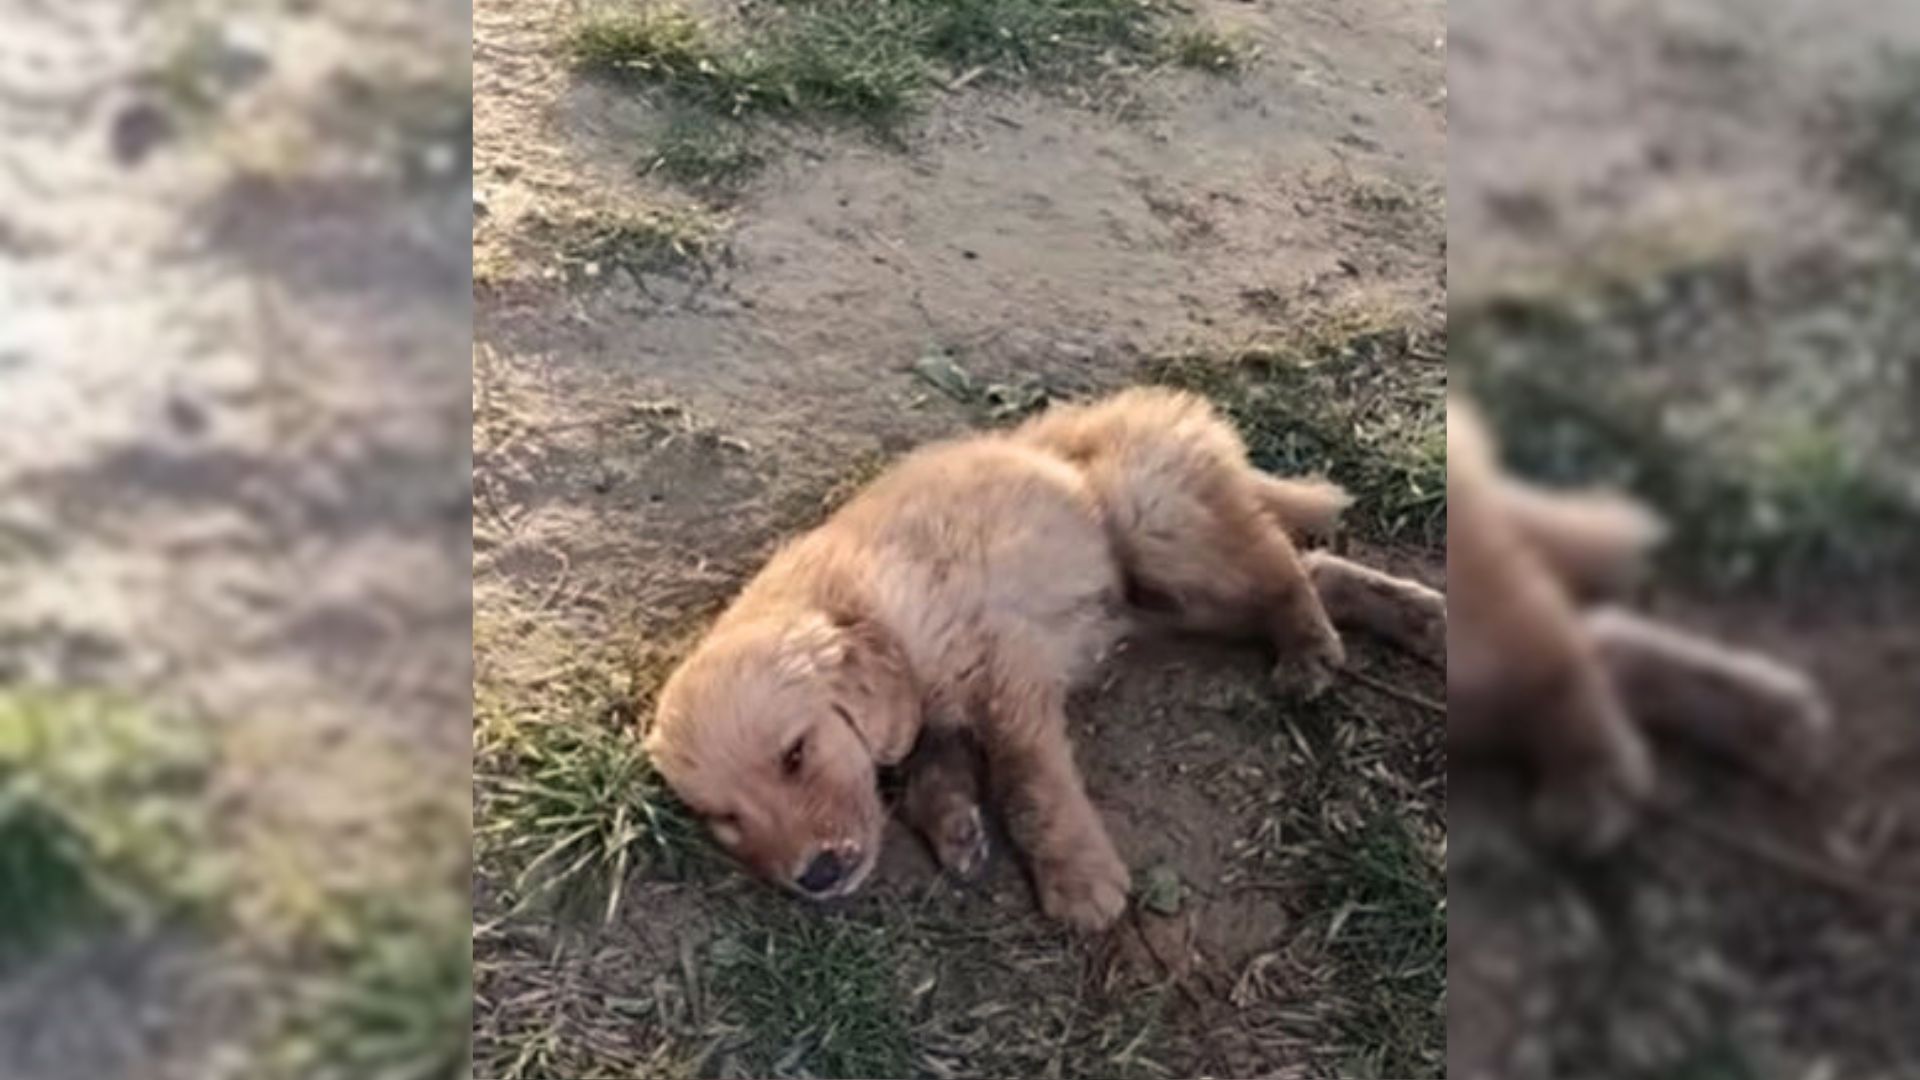 Rescuers Rush Exhausted Puppy To The Hospital After Finding Him Lying Motionless On The Ground